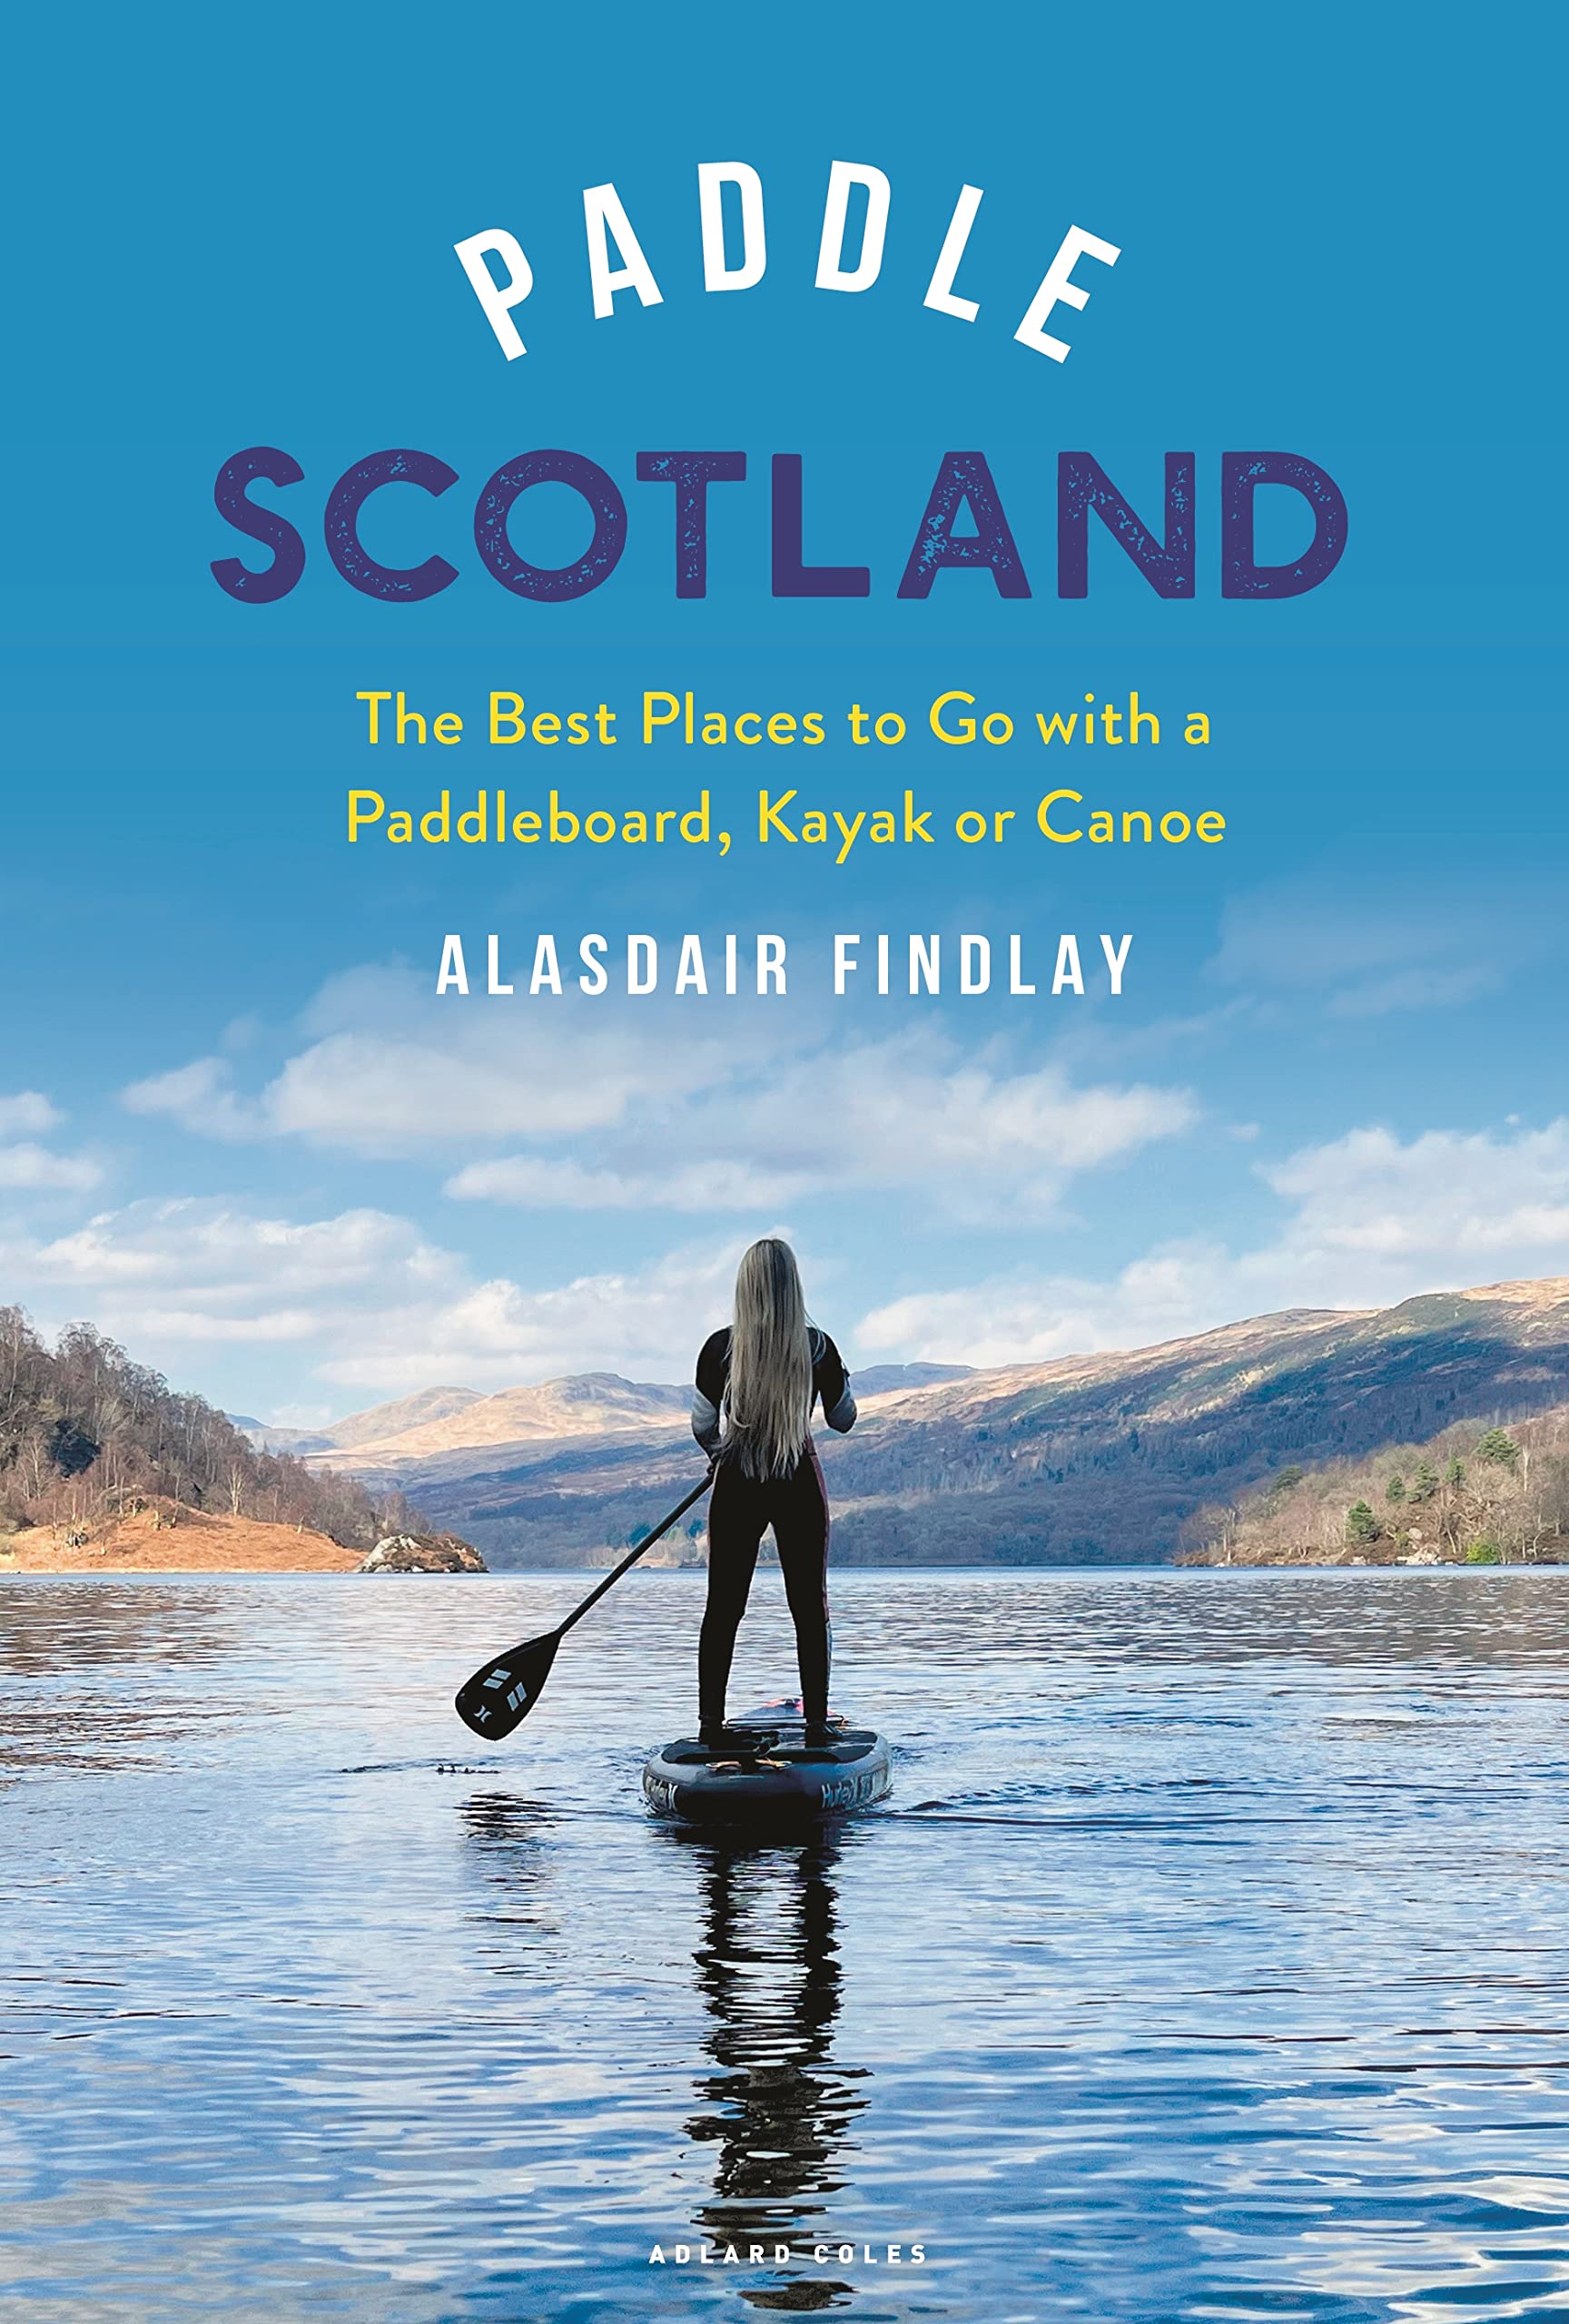 Paddle Scotland - Best Places to go with a Paddleboard, Kayak or Canoe Book by penny black